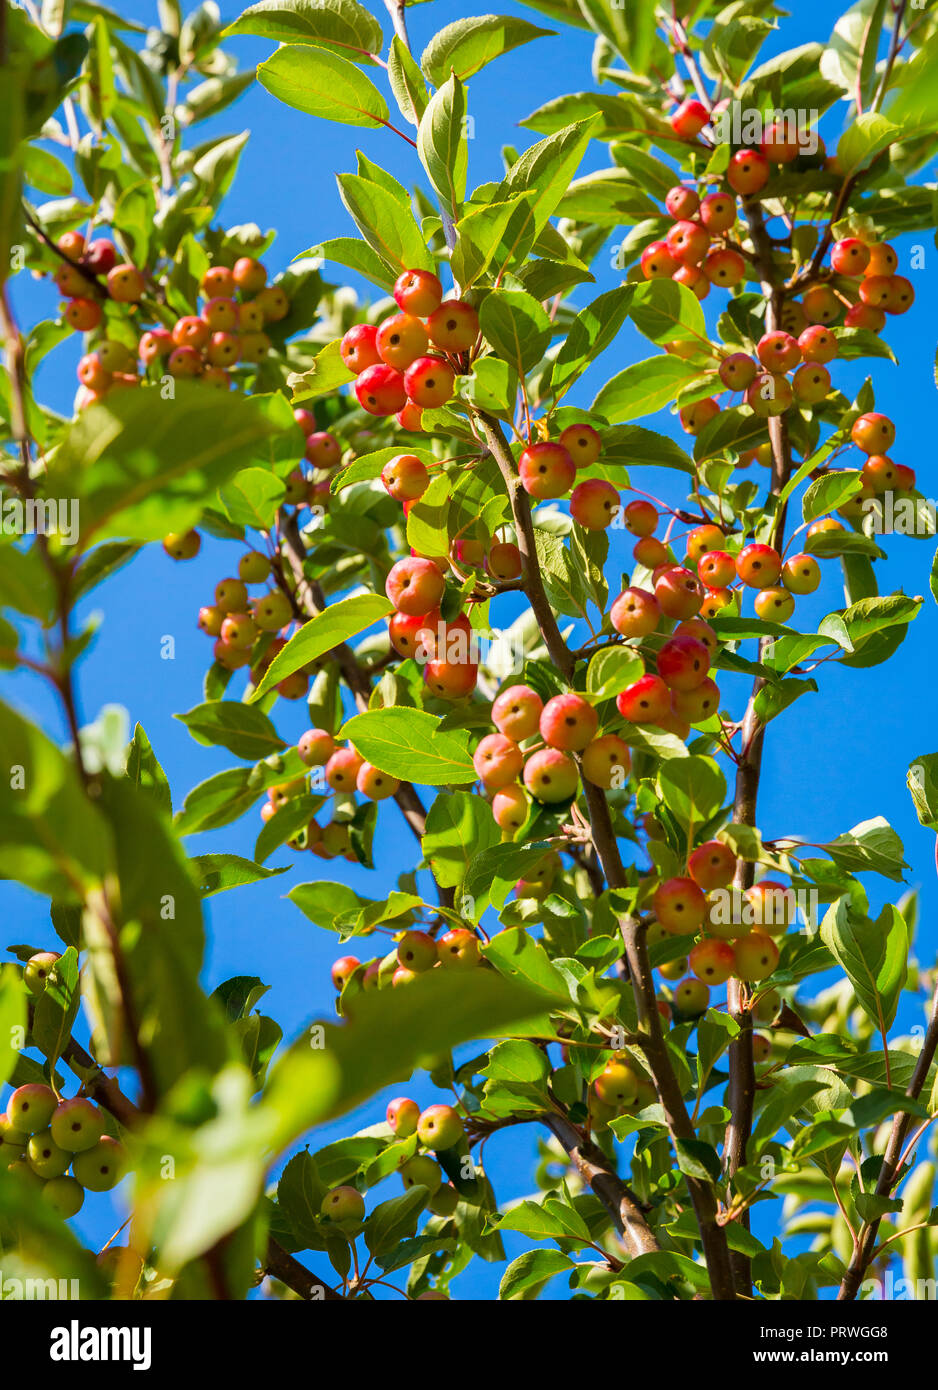 Siberian crab apples (Malus baccata)  in Autumn or Fall.  Colourful red and yellow juicy apples against a bright blue sky. Portrait Stock Photo